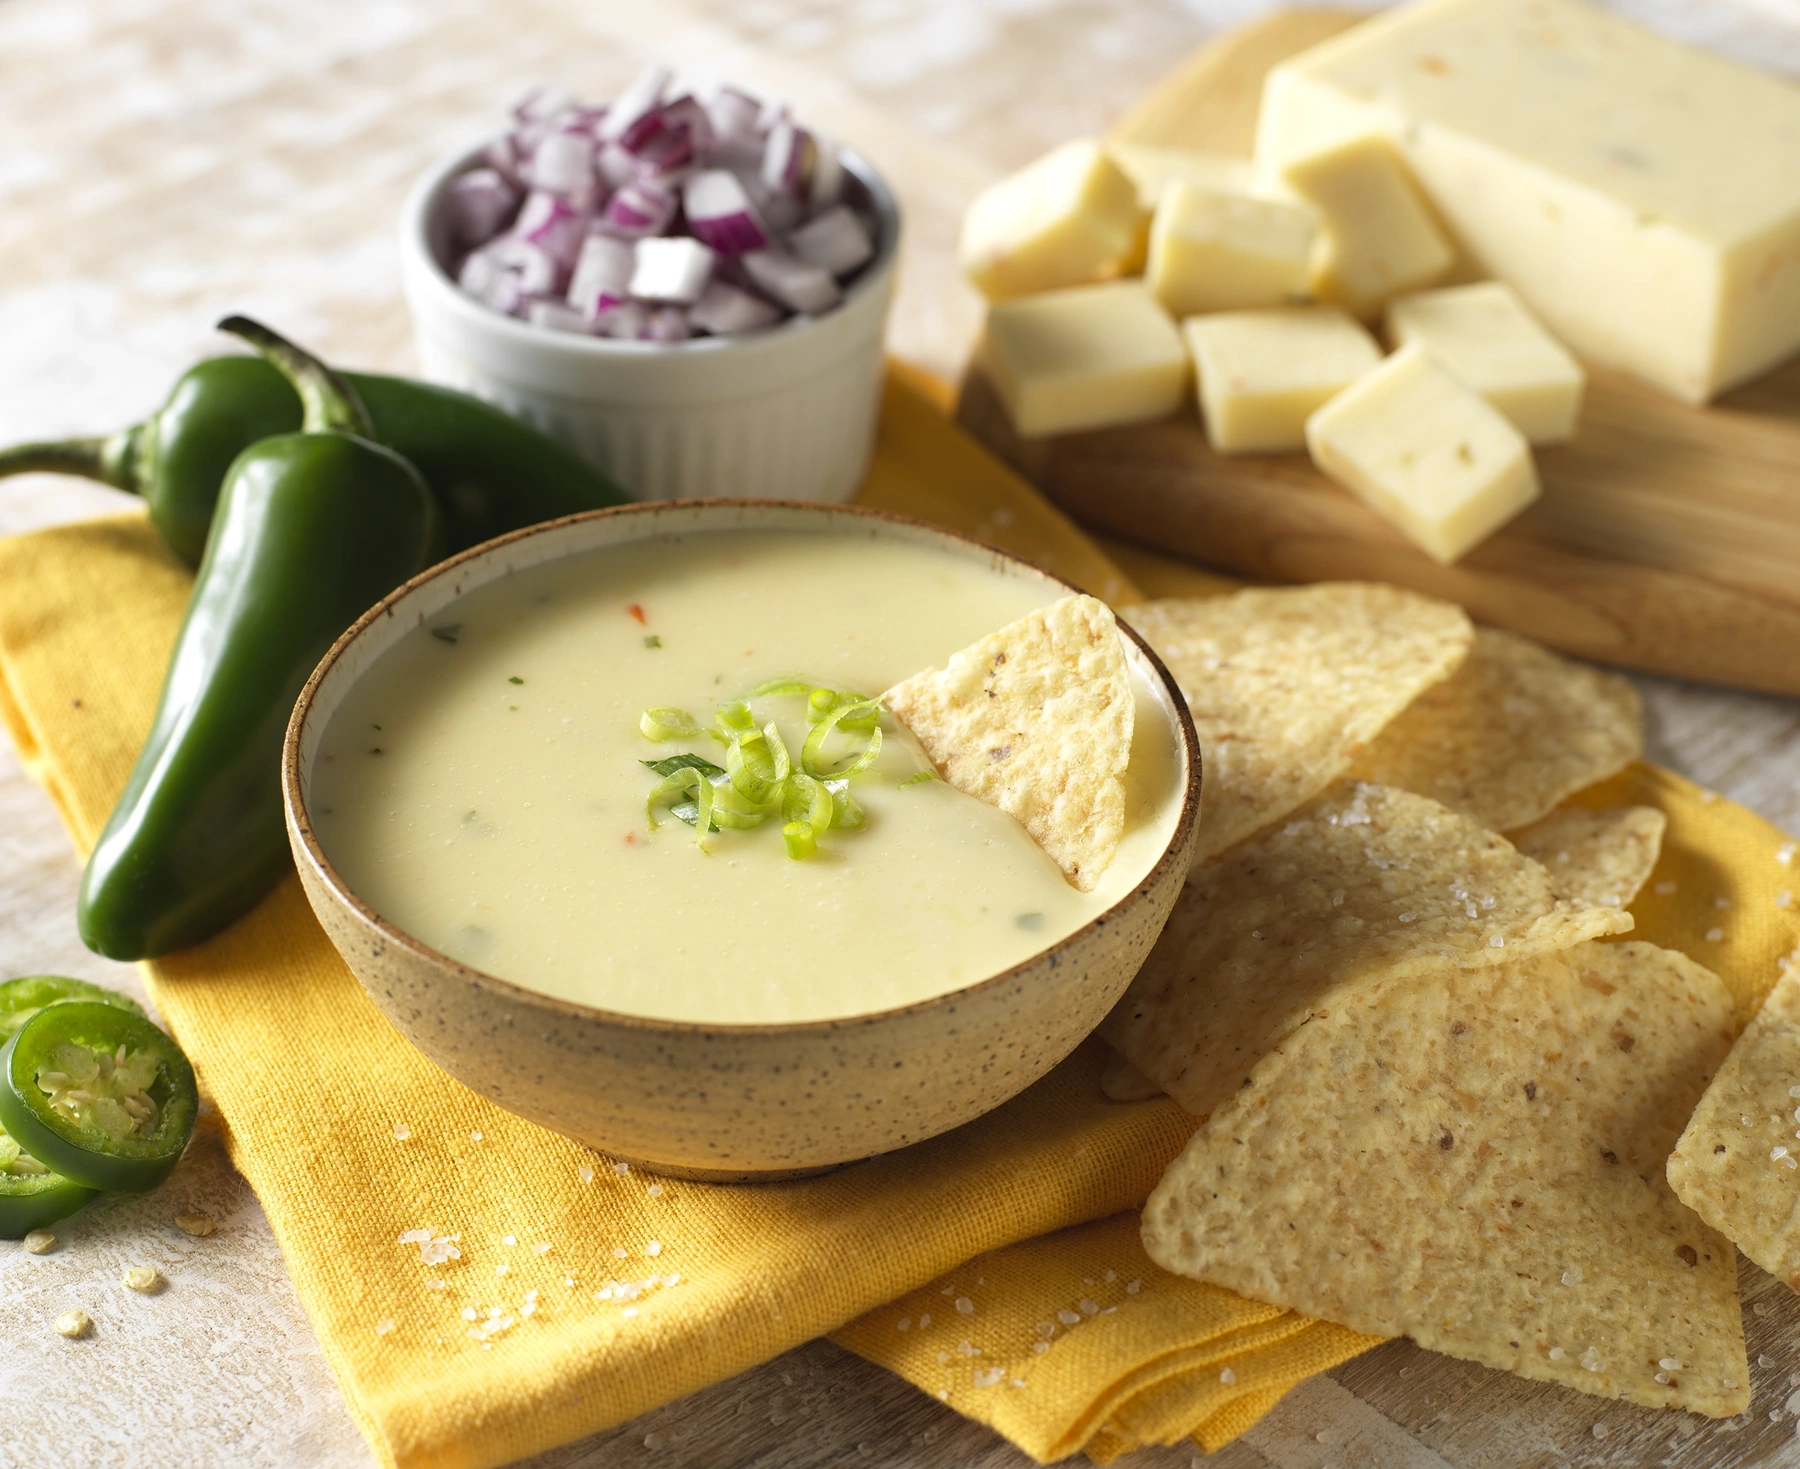 Link Image for : Cheese Dips and Cheese Sauces